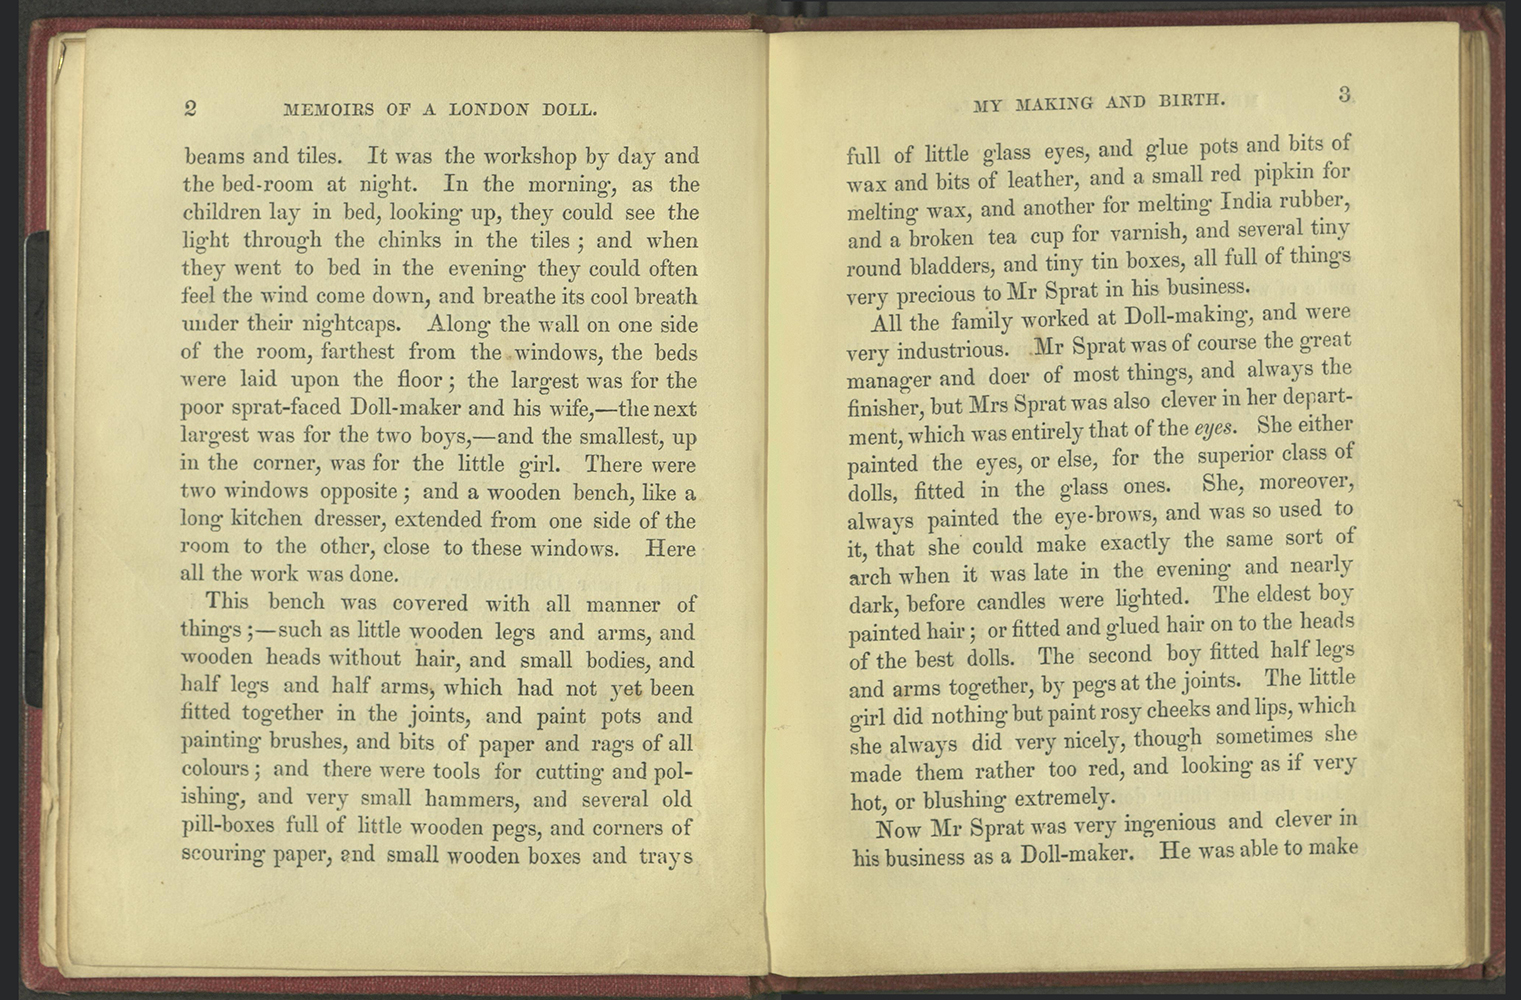 Pages 2-3, describing the work of the Sprat family